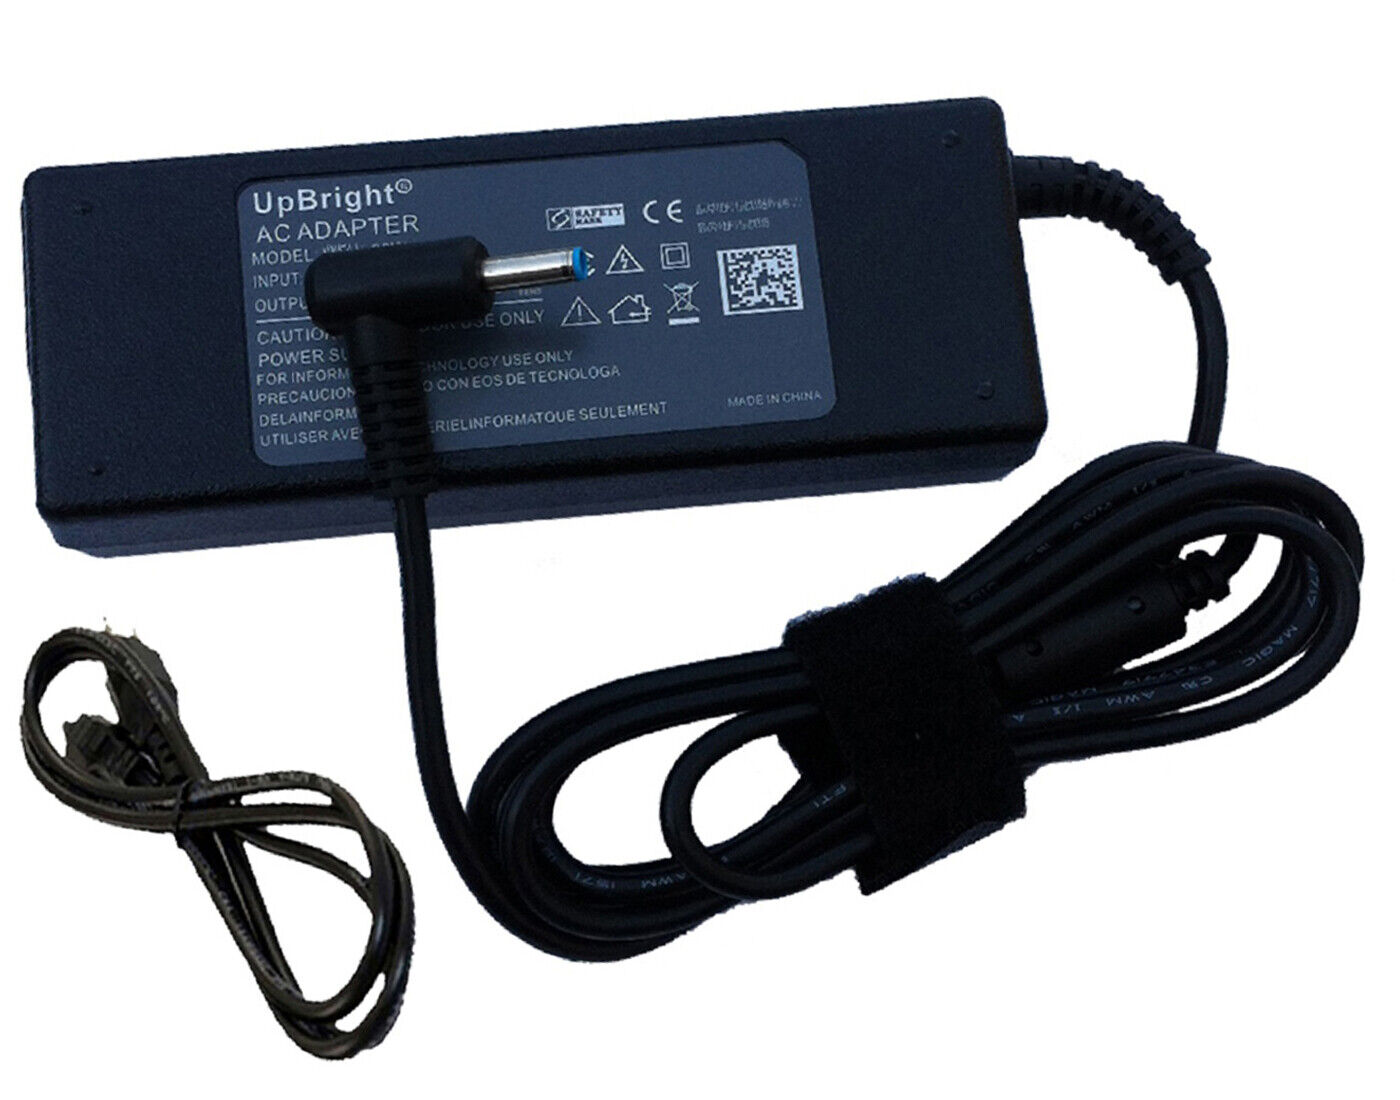 NEW AC Adapter For HP 14-an000 14-ax000 Laptop PC Battery Charger Power Supply